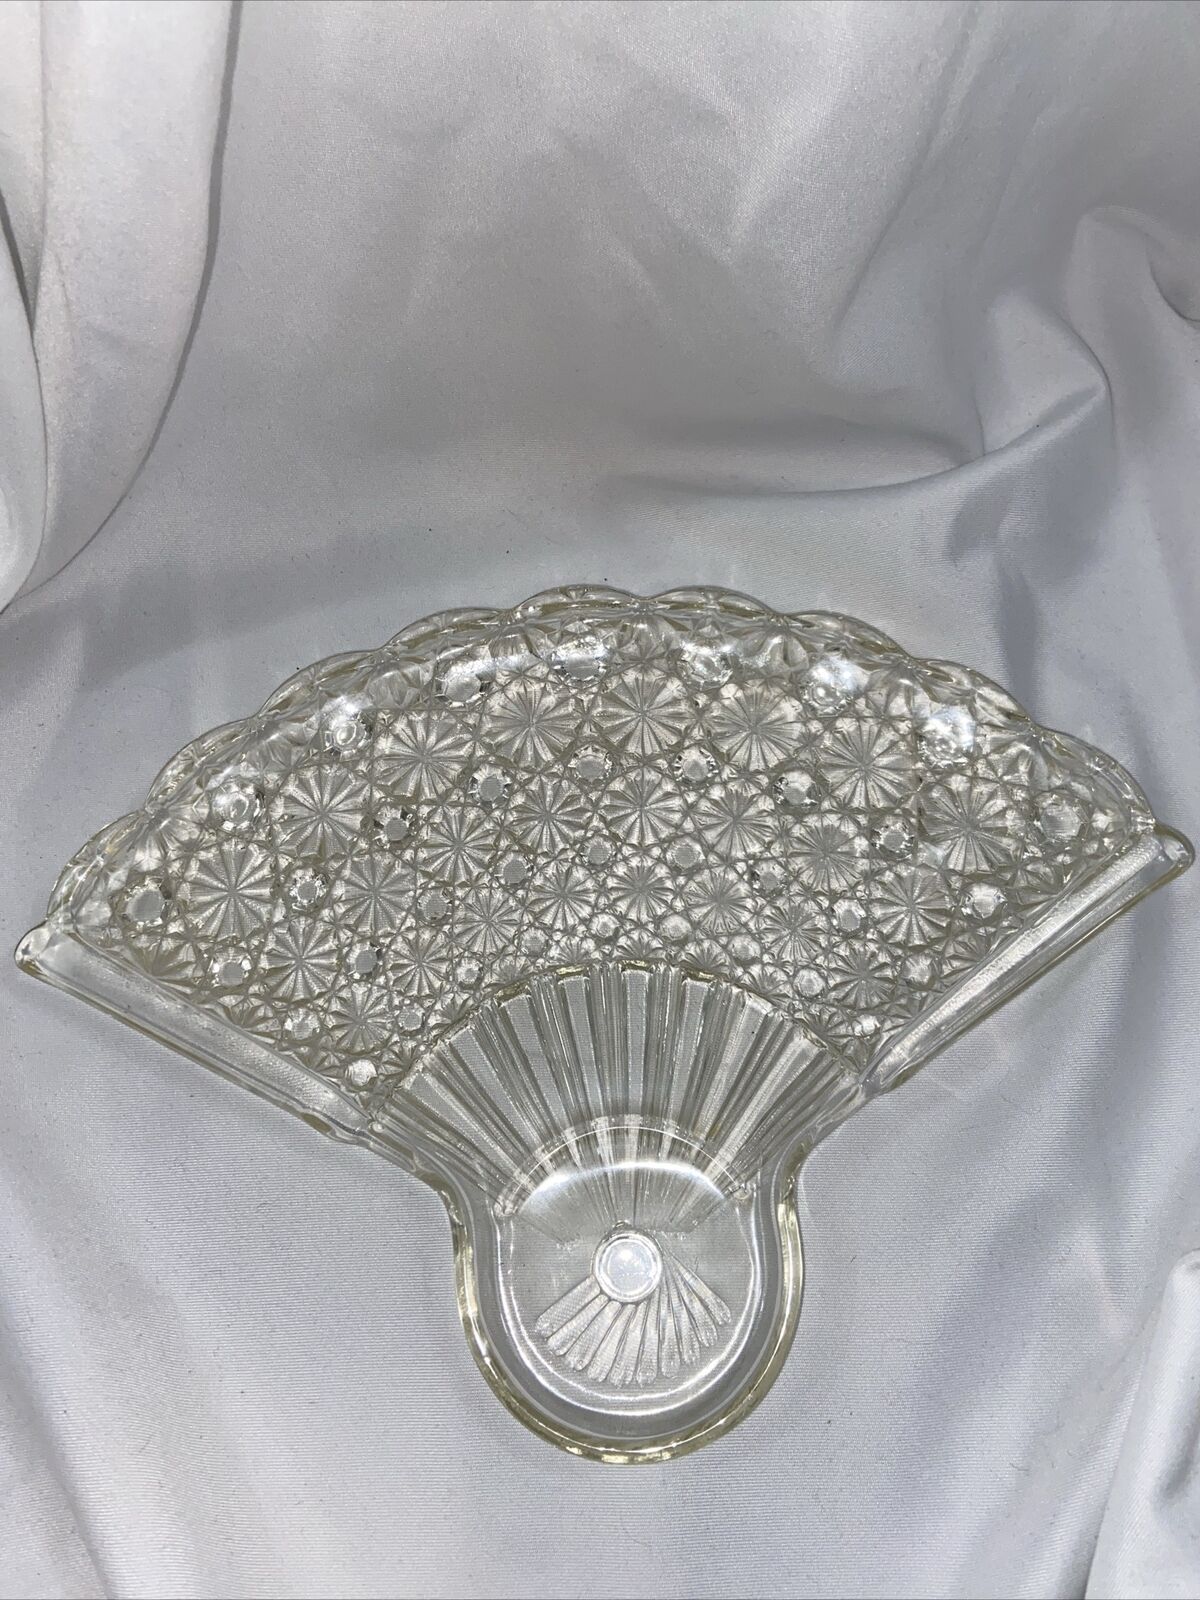 Vintage Glass Fan Shaped Relish Serving Dish Tray